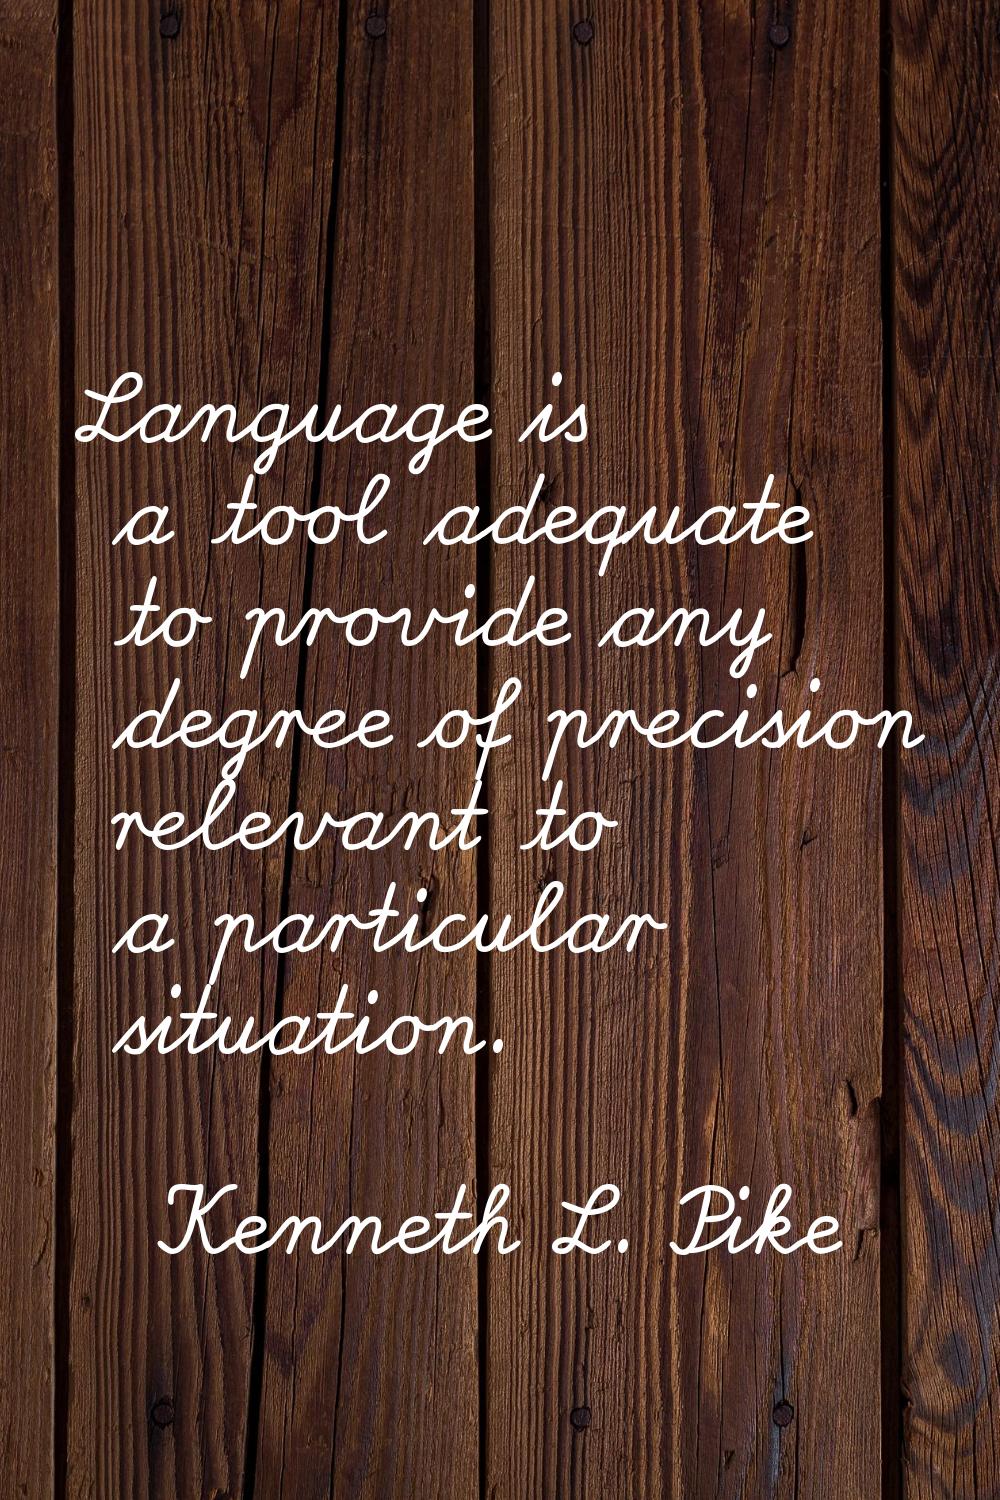 Language is a tool adequate to provide any degree of precision relevant to a particular situation.